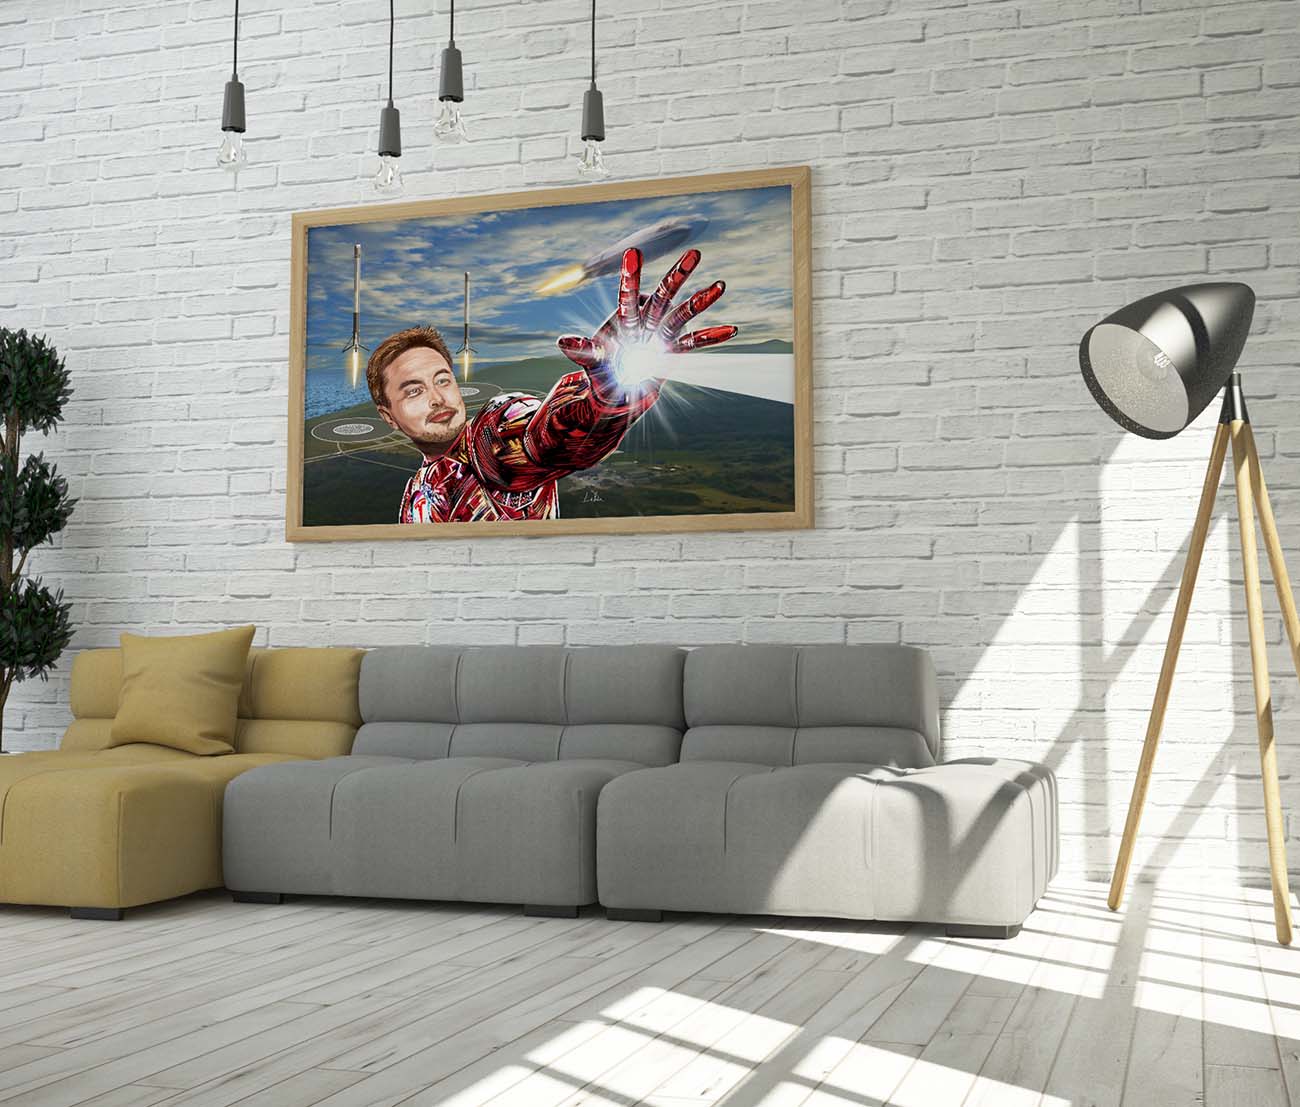 Iron Musk, conceptual portrait of Elon Musk by Doug LaRue on a white brick wall over a couch